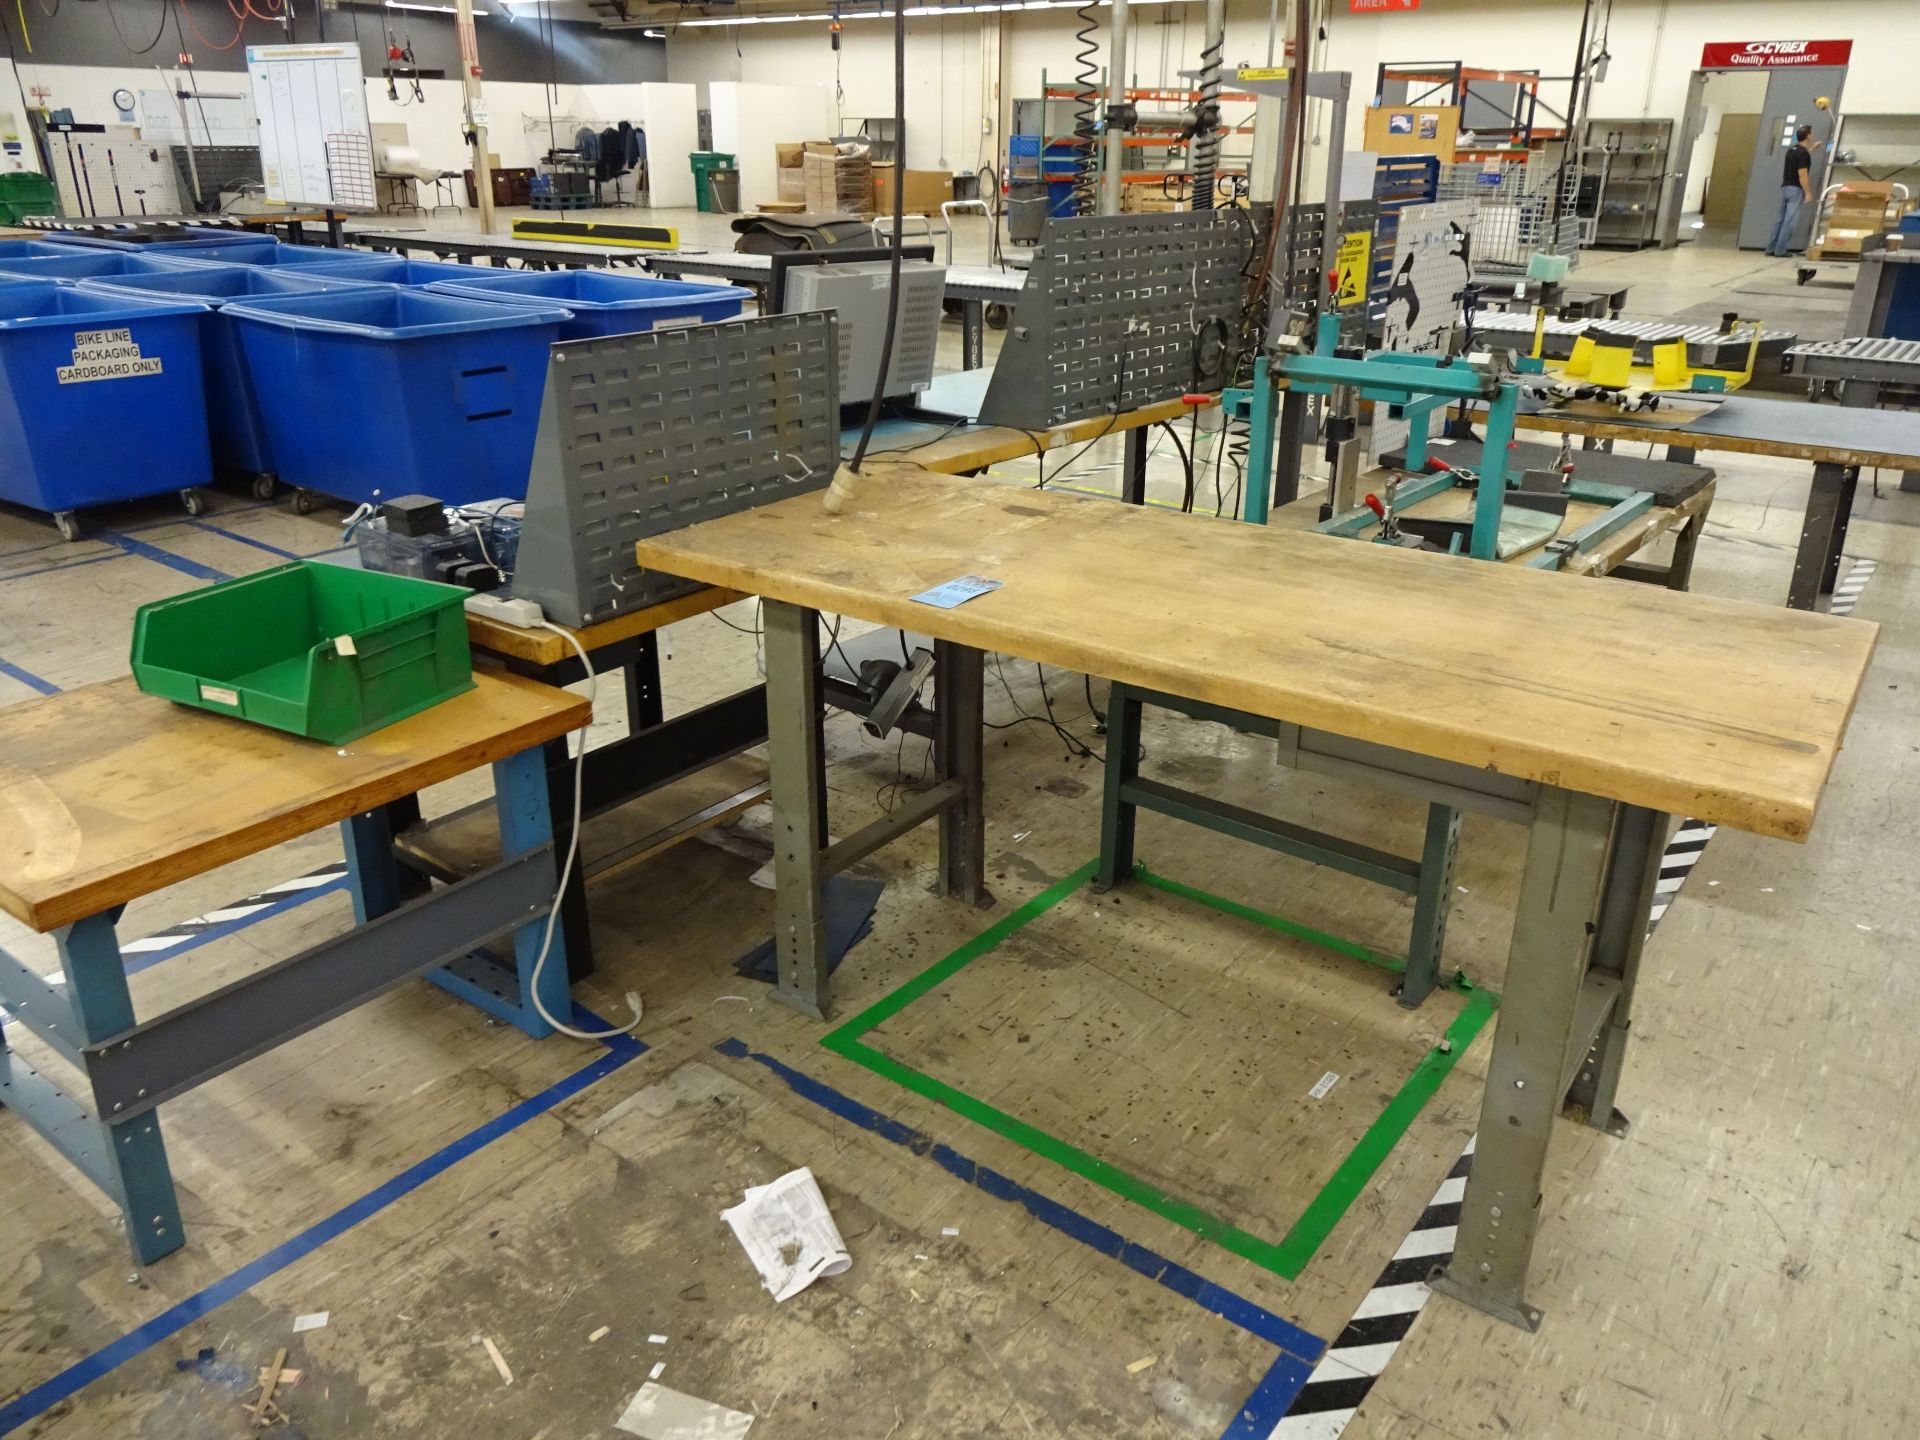 STEEL FRAME BENCHES